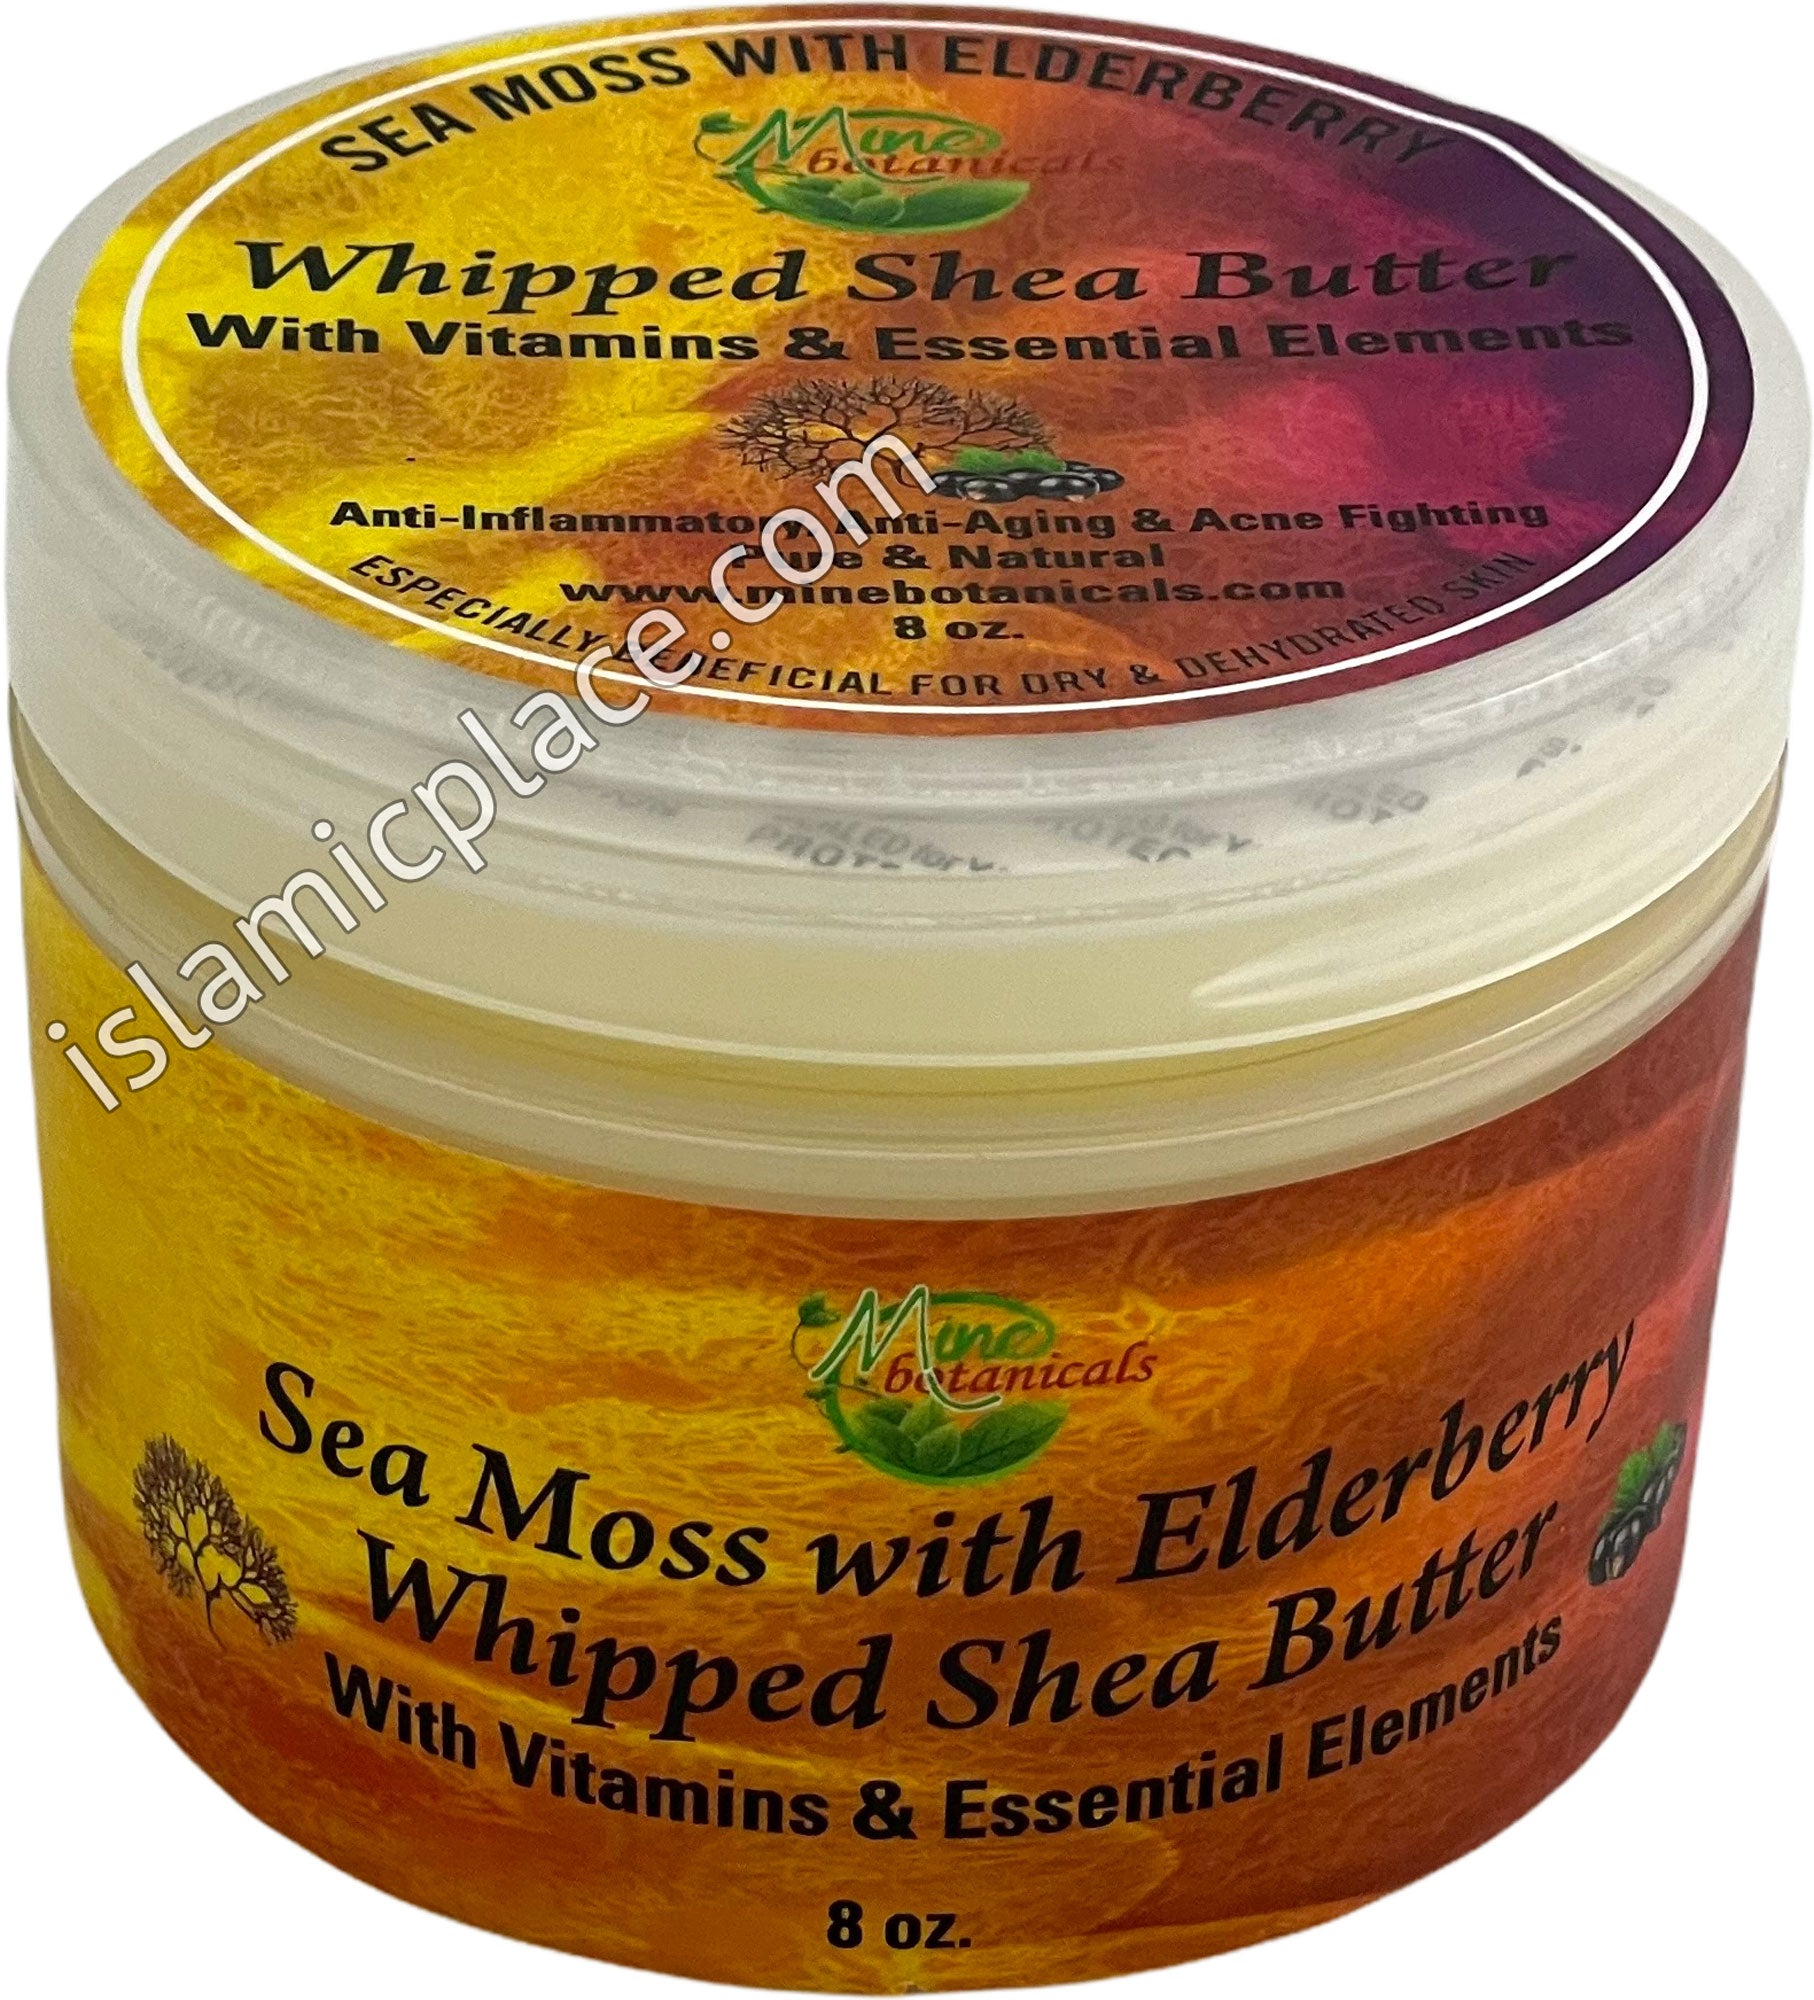 Sea Moss with Elderberry Whipped Shea Butter